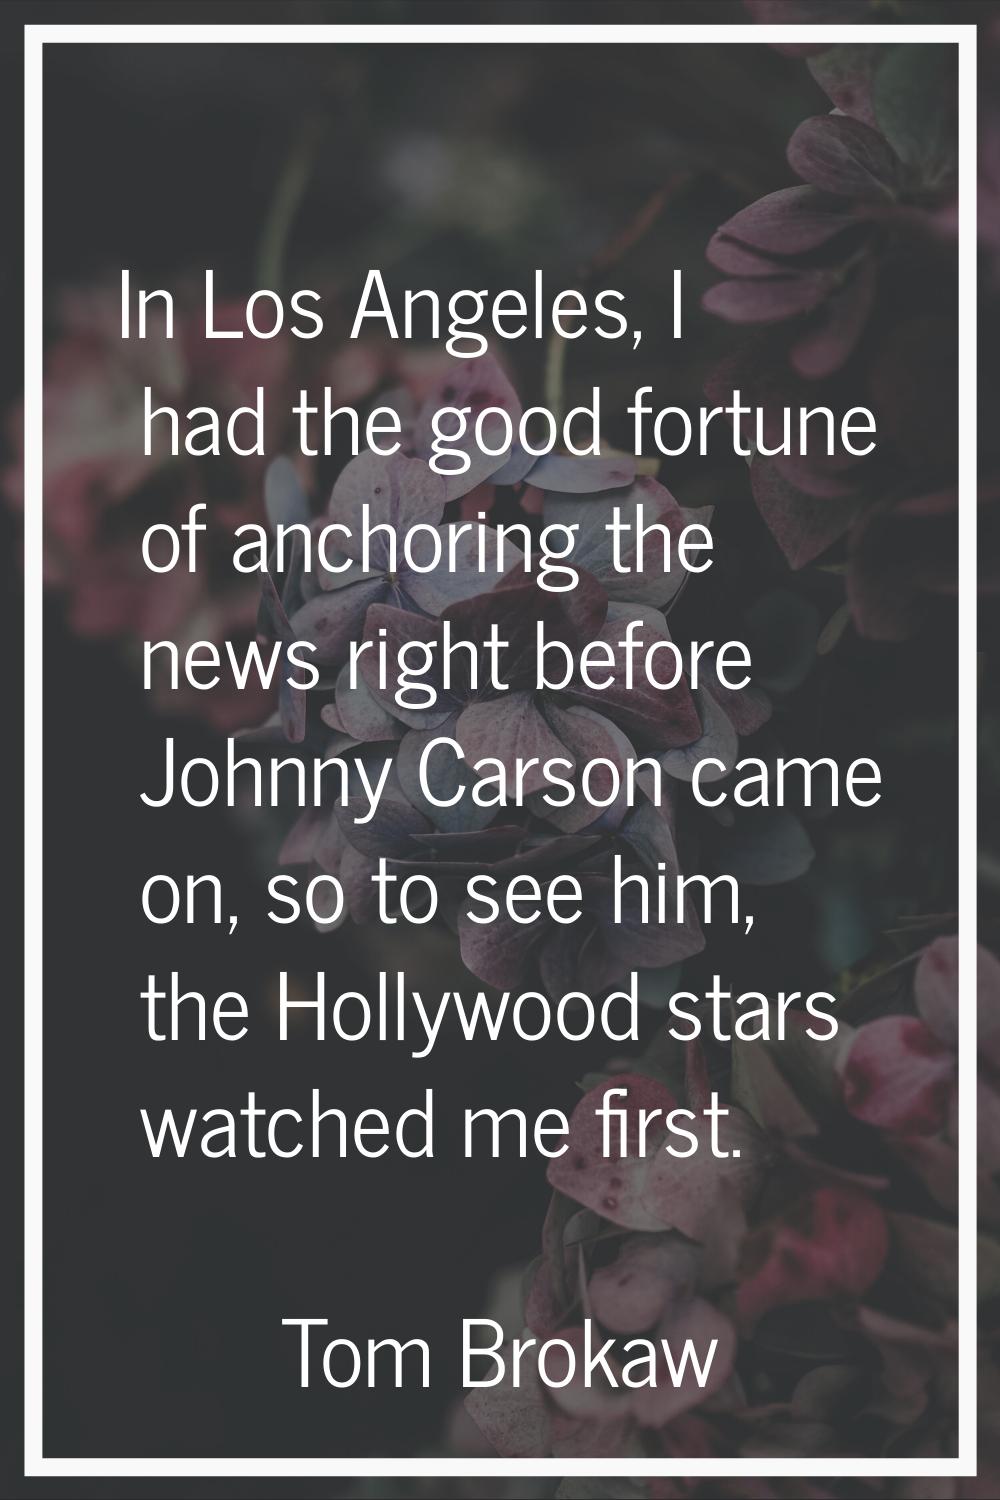 In Los Angeles, I had the good fortune of anchoring the news right before Johnny Carson came on, so